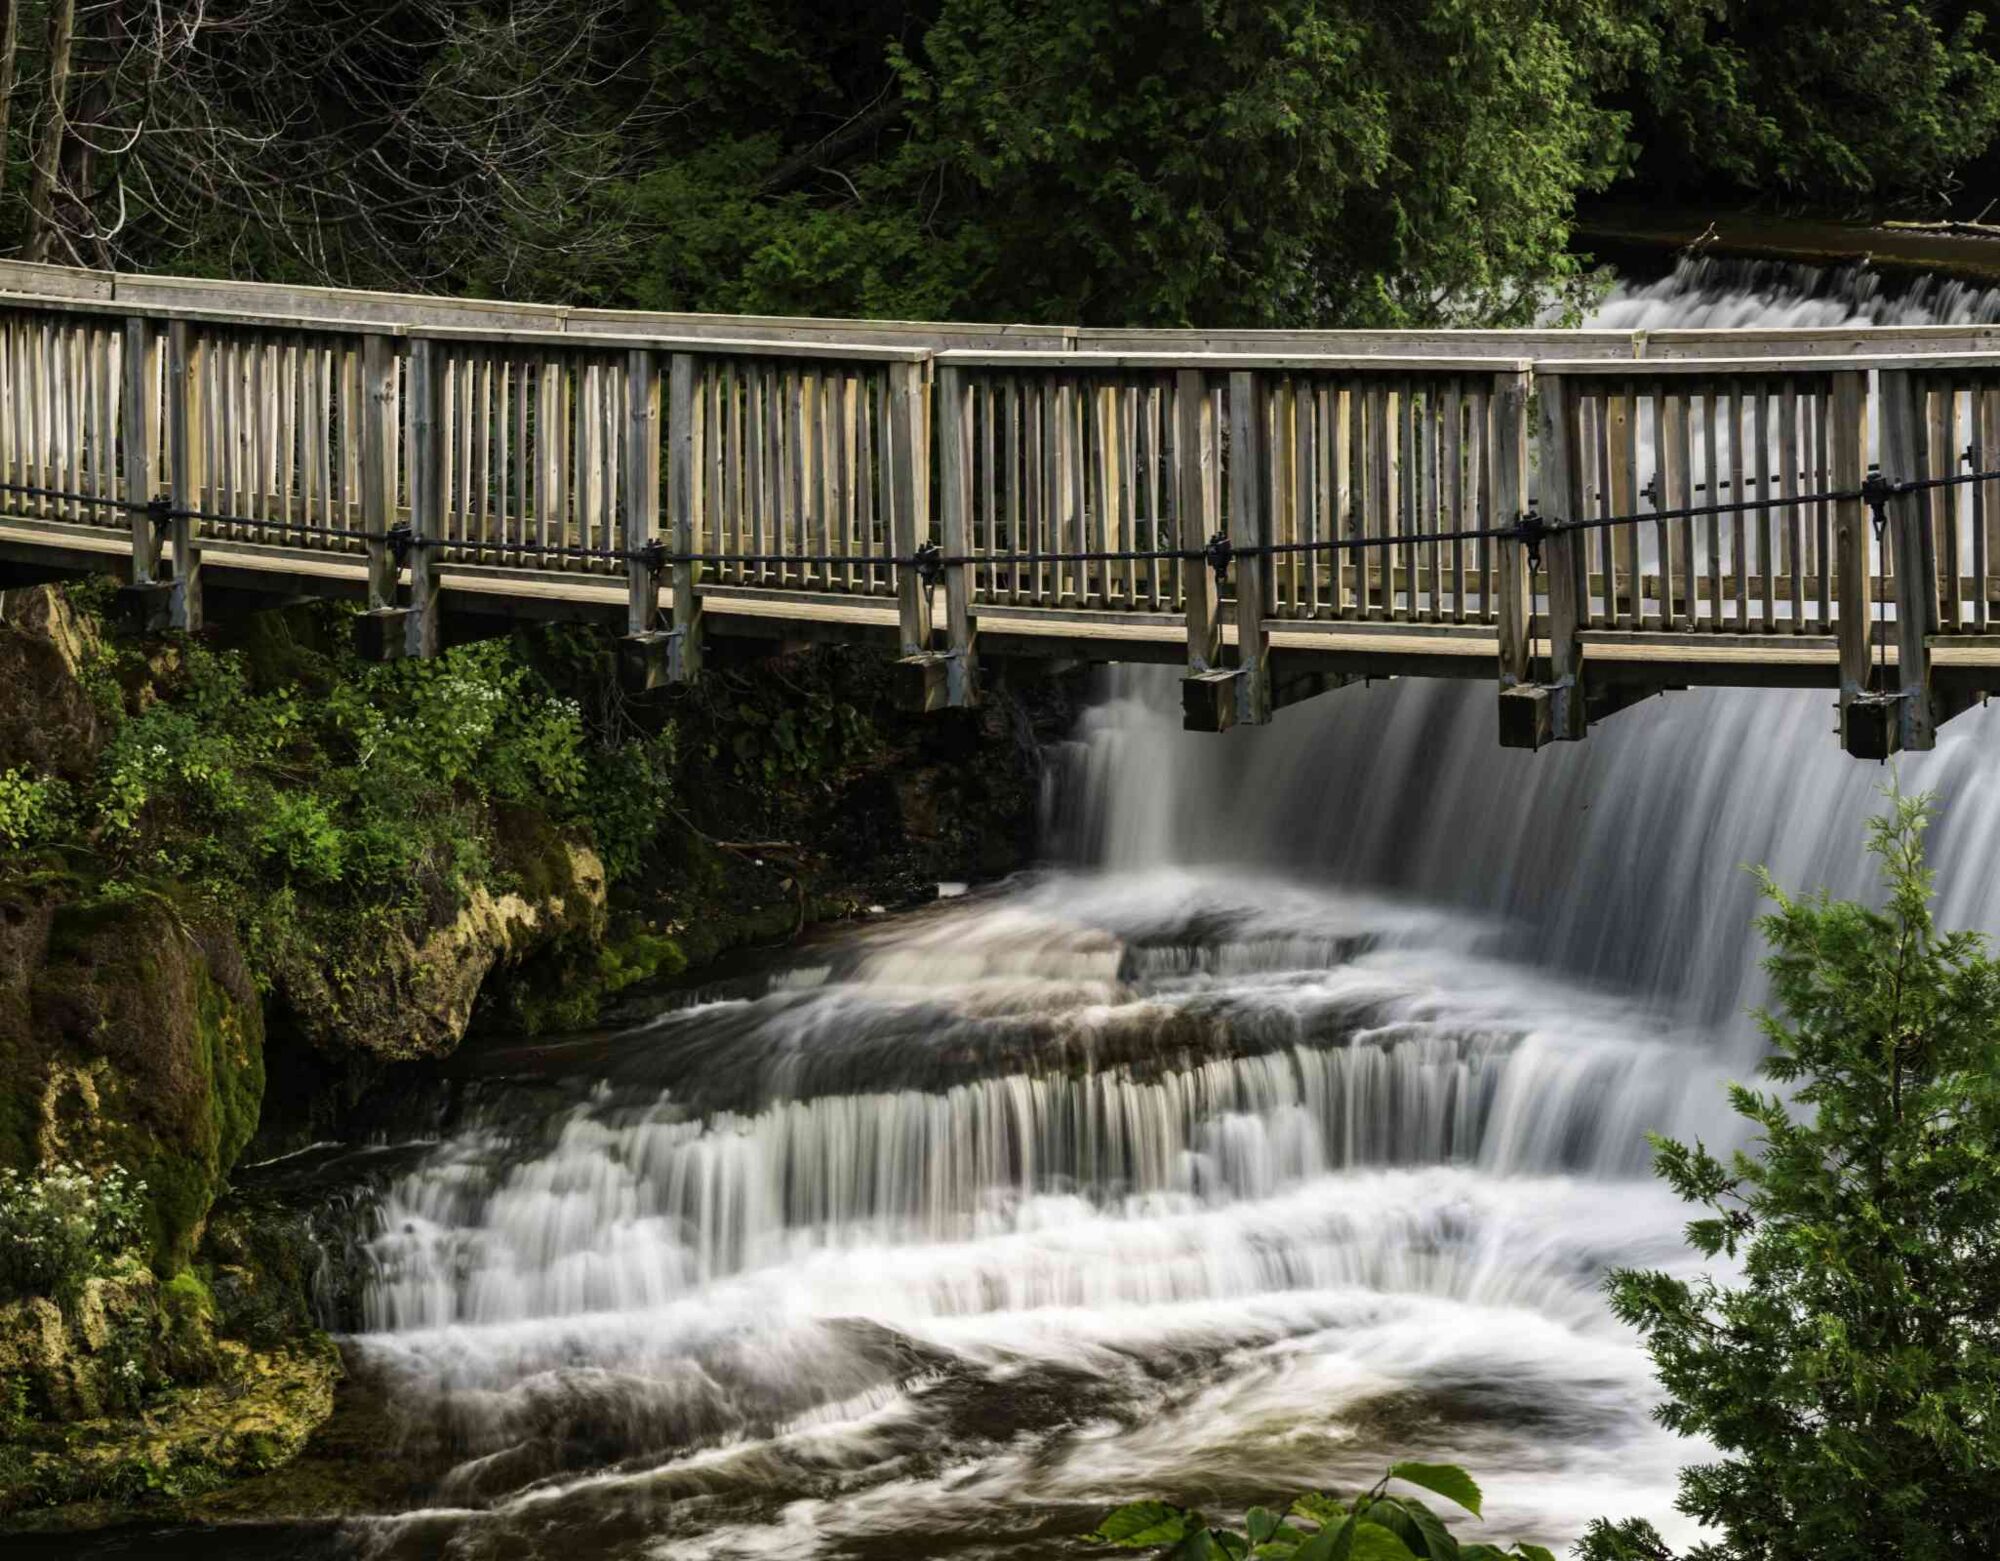 A wooden bridge suspended over a small waterfall